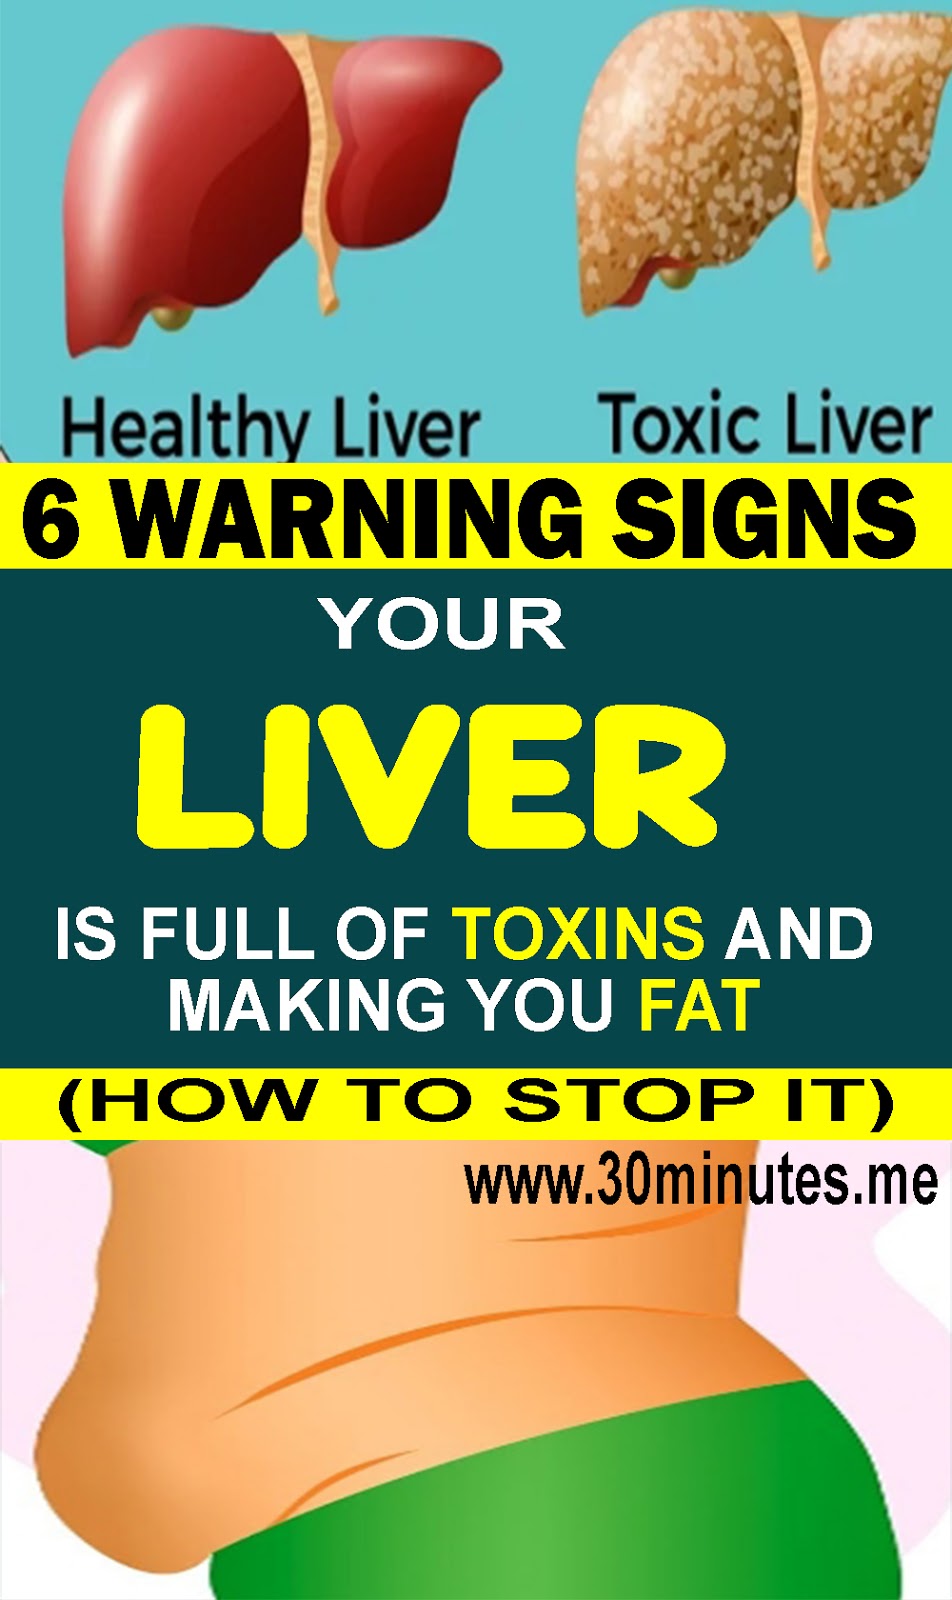 6 Clear Warning Signs Your Liver Is Full Of Toxins And Making You Fat (How to Stop it)